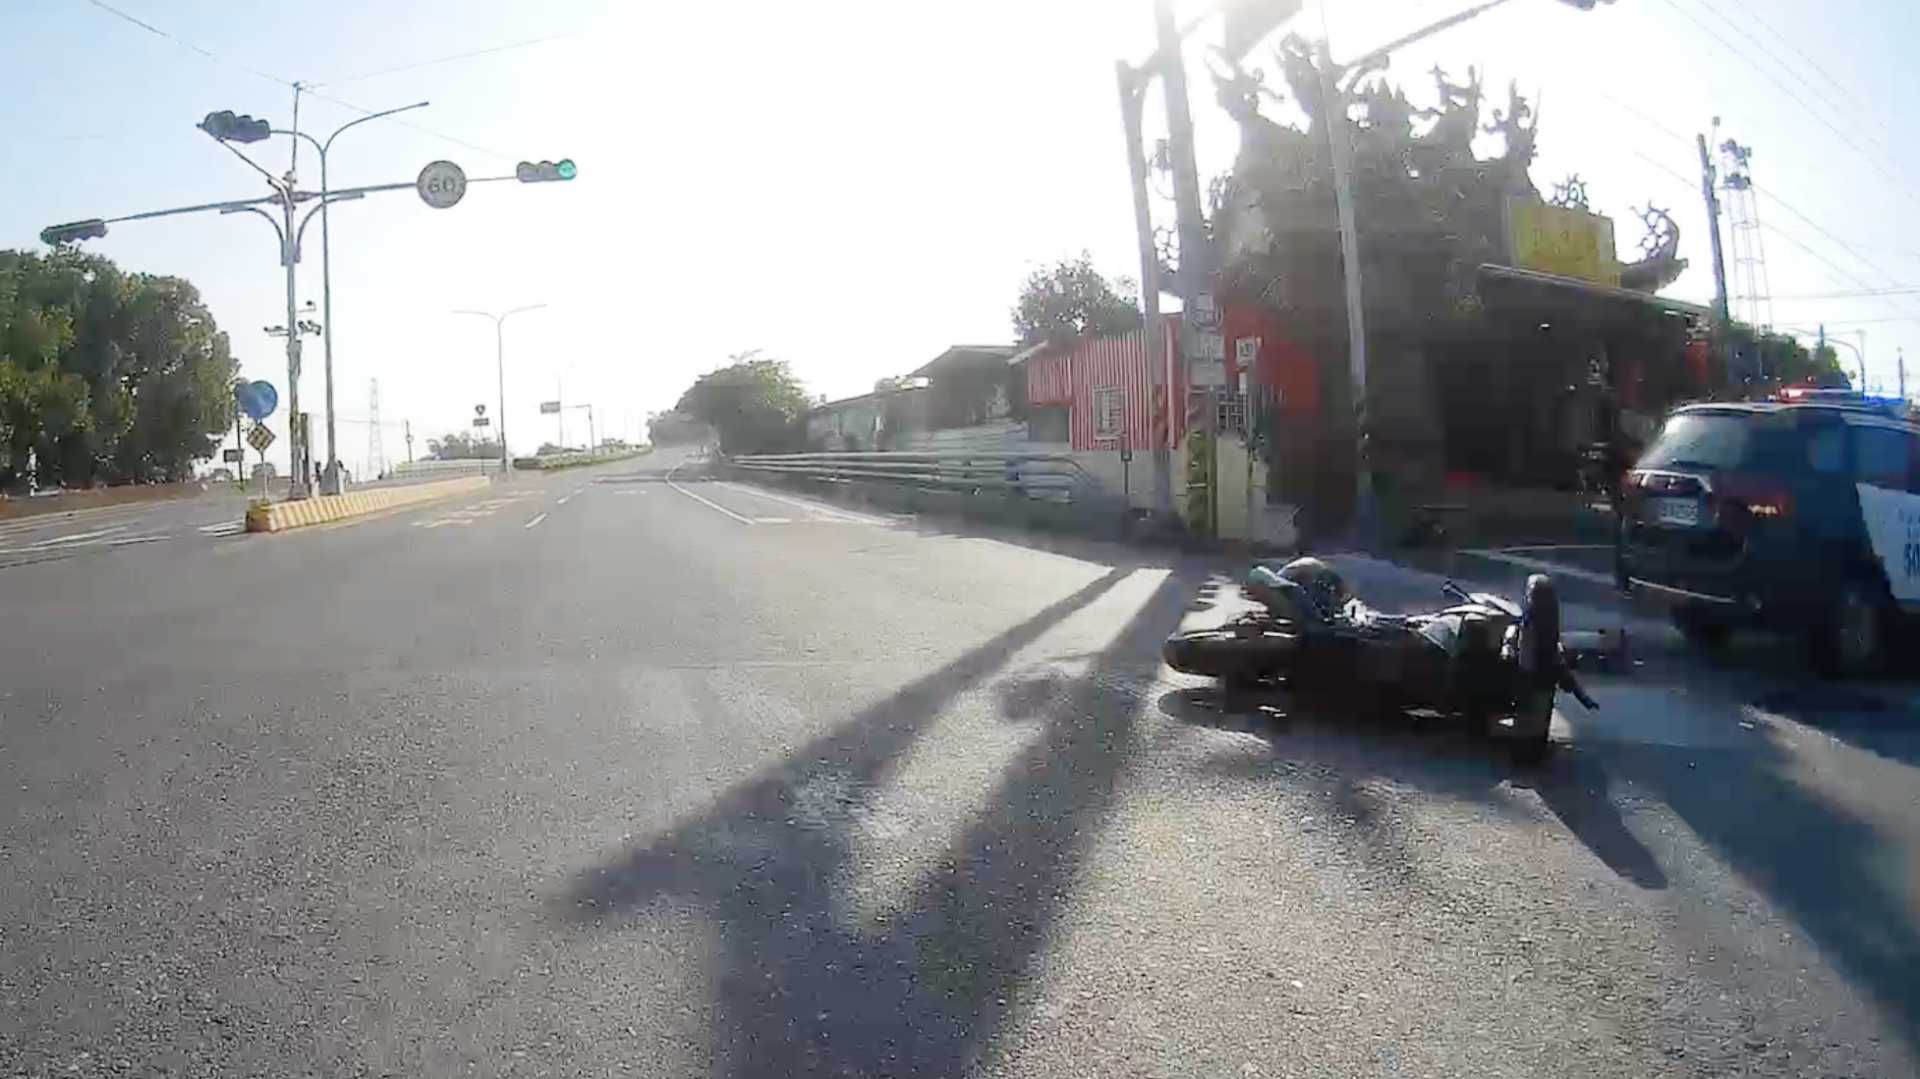 Dashcam screenshot of a scooter fallen on its side in the middle of an intersection. A police car with flashing lights is parked next to it. There is a helmet in the scene but it’s unclear if a person is laying there or not.